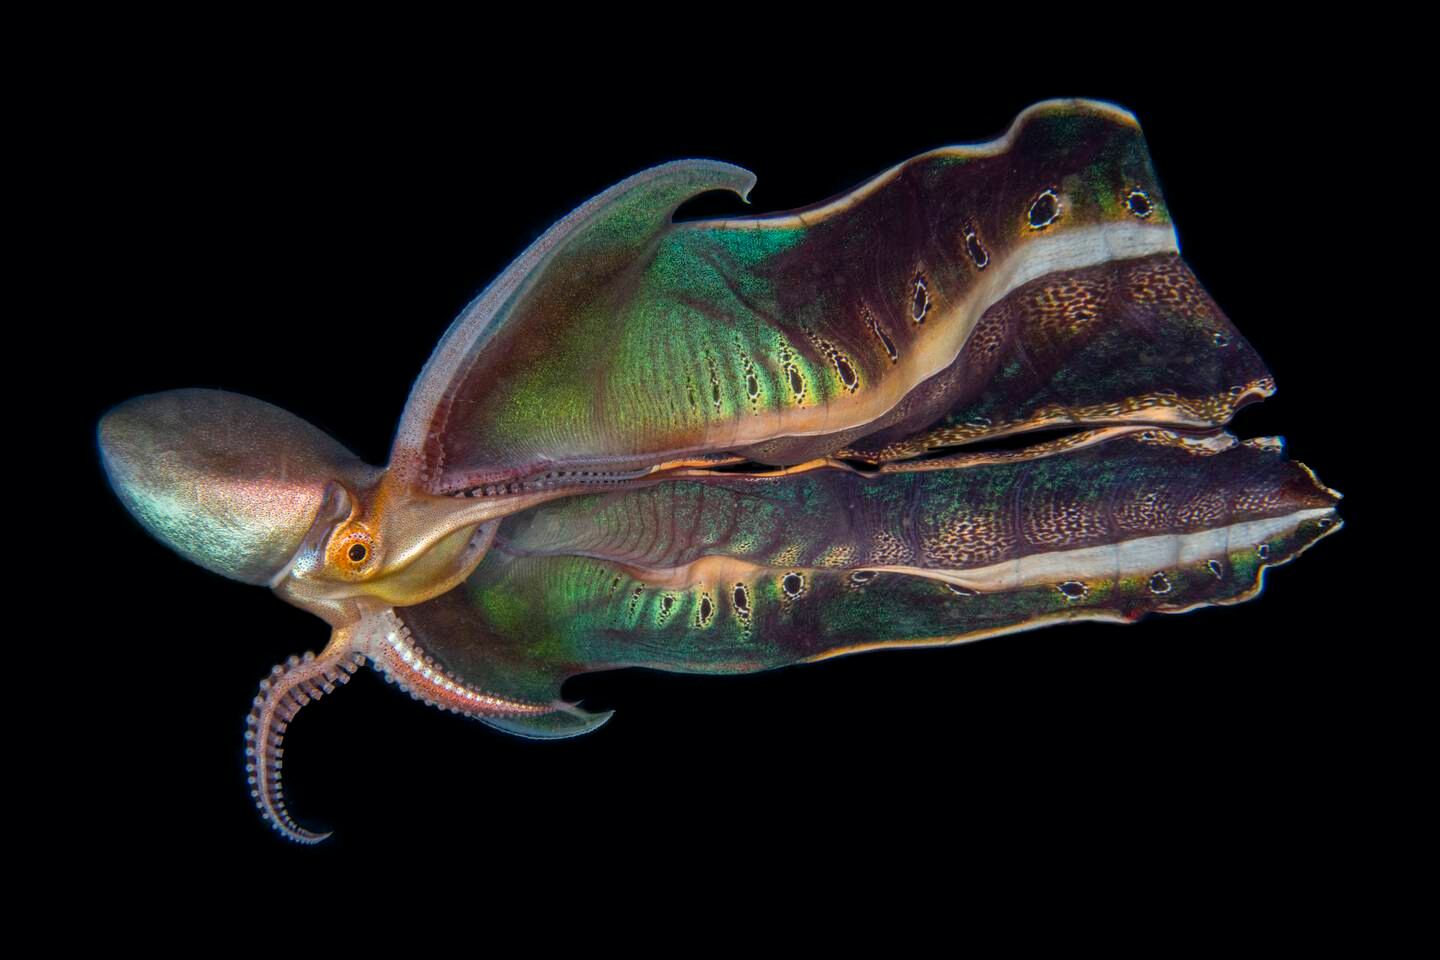 Katherine Lu's photo of a blanket octopus showing off its beautiful patterns and colours in the Philippines. Photo: Katherine Lu / Ocean Photographer of the Year